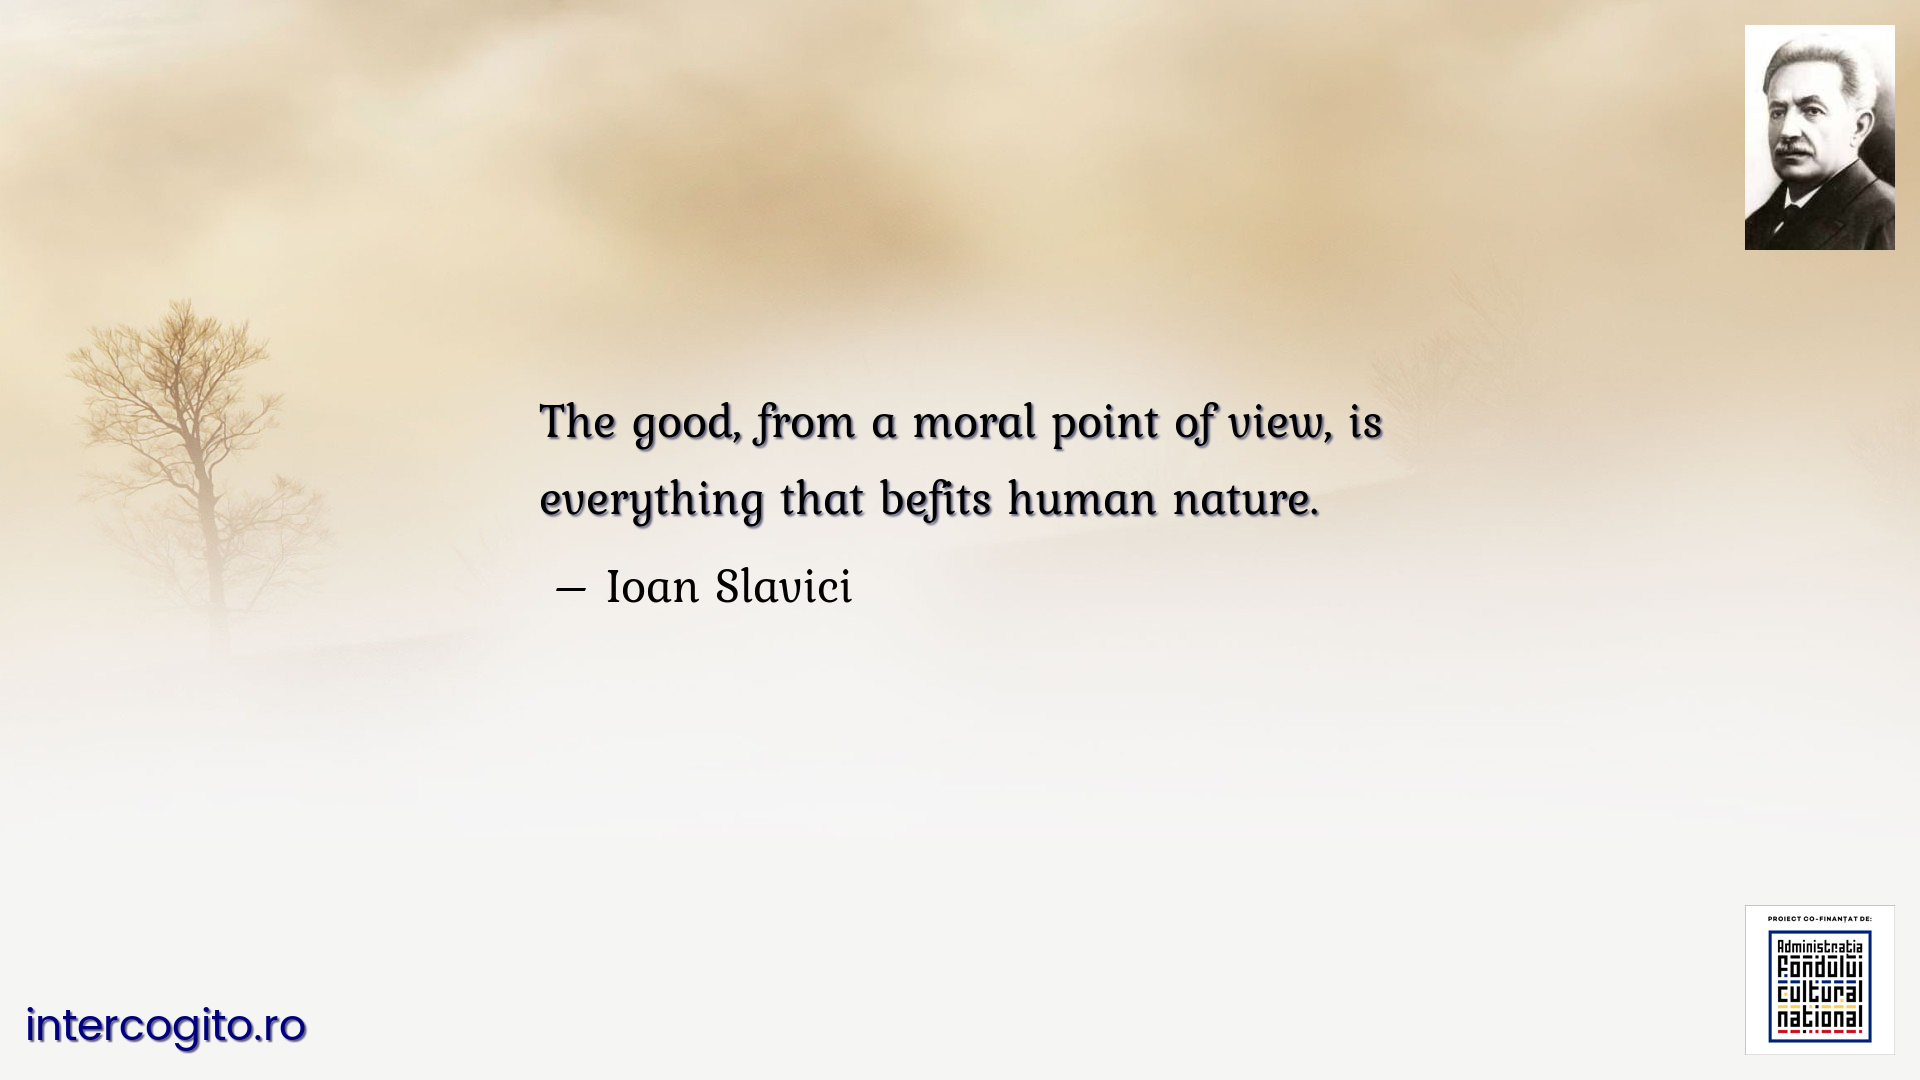 The good, from a moral point of view, is everything that befits human nature.